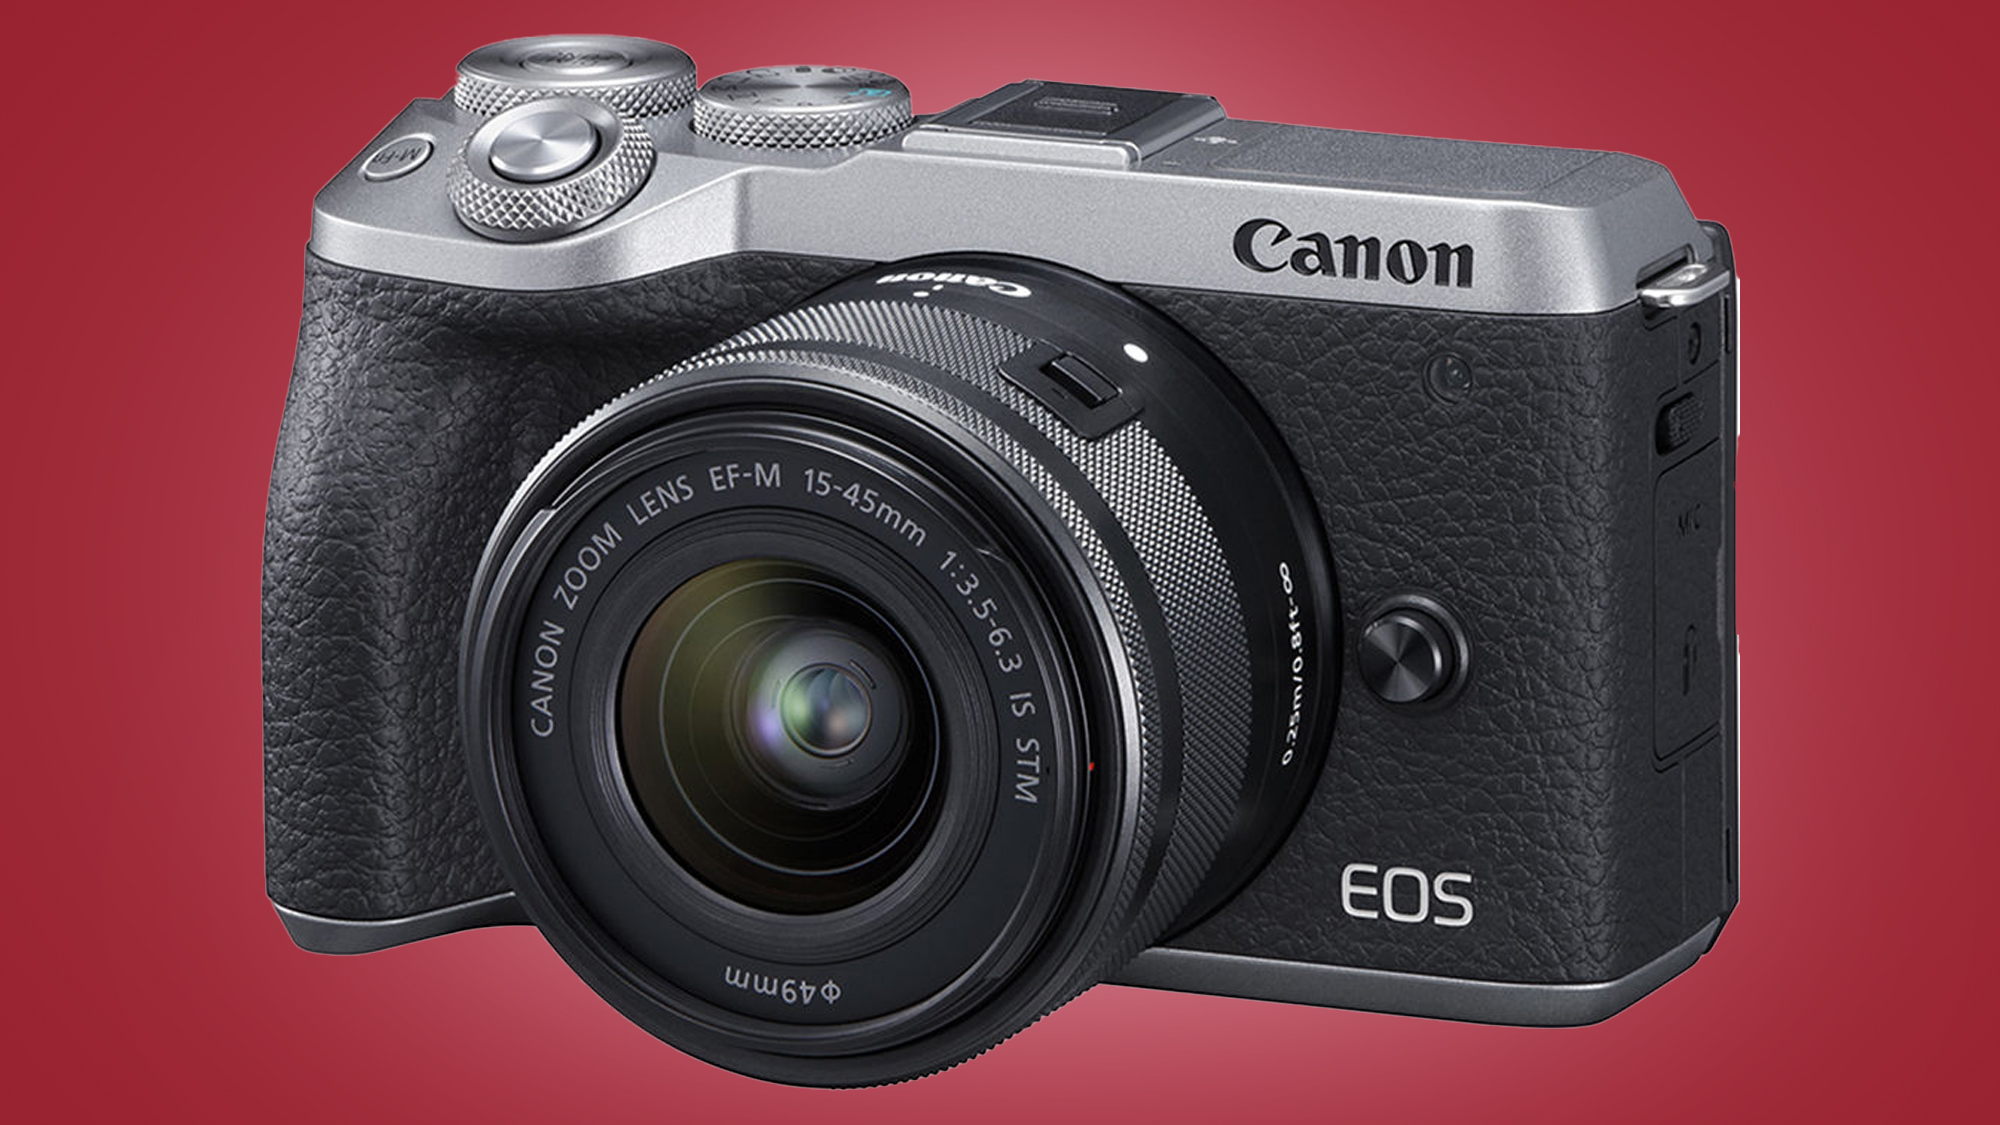 Canon EOS M6 Mark II camera on red background